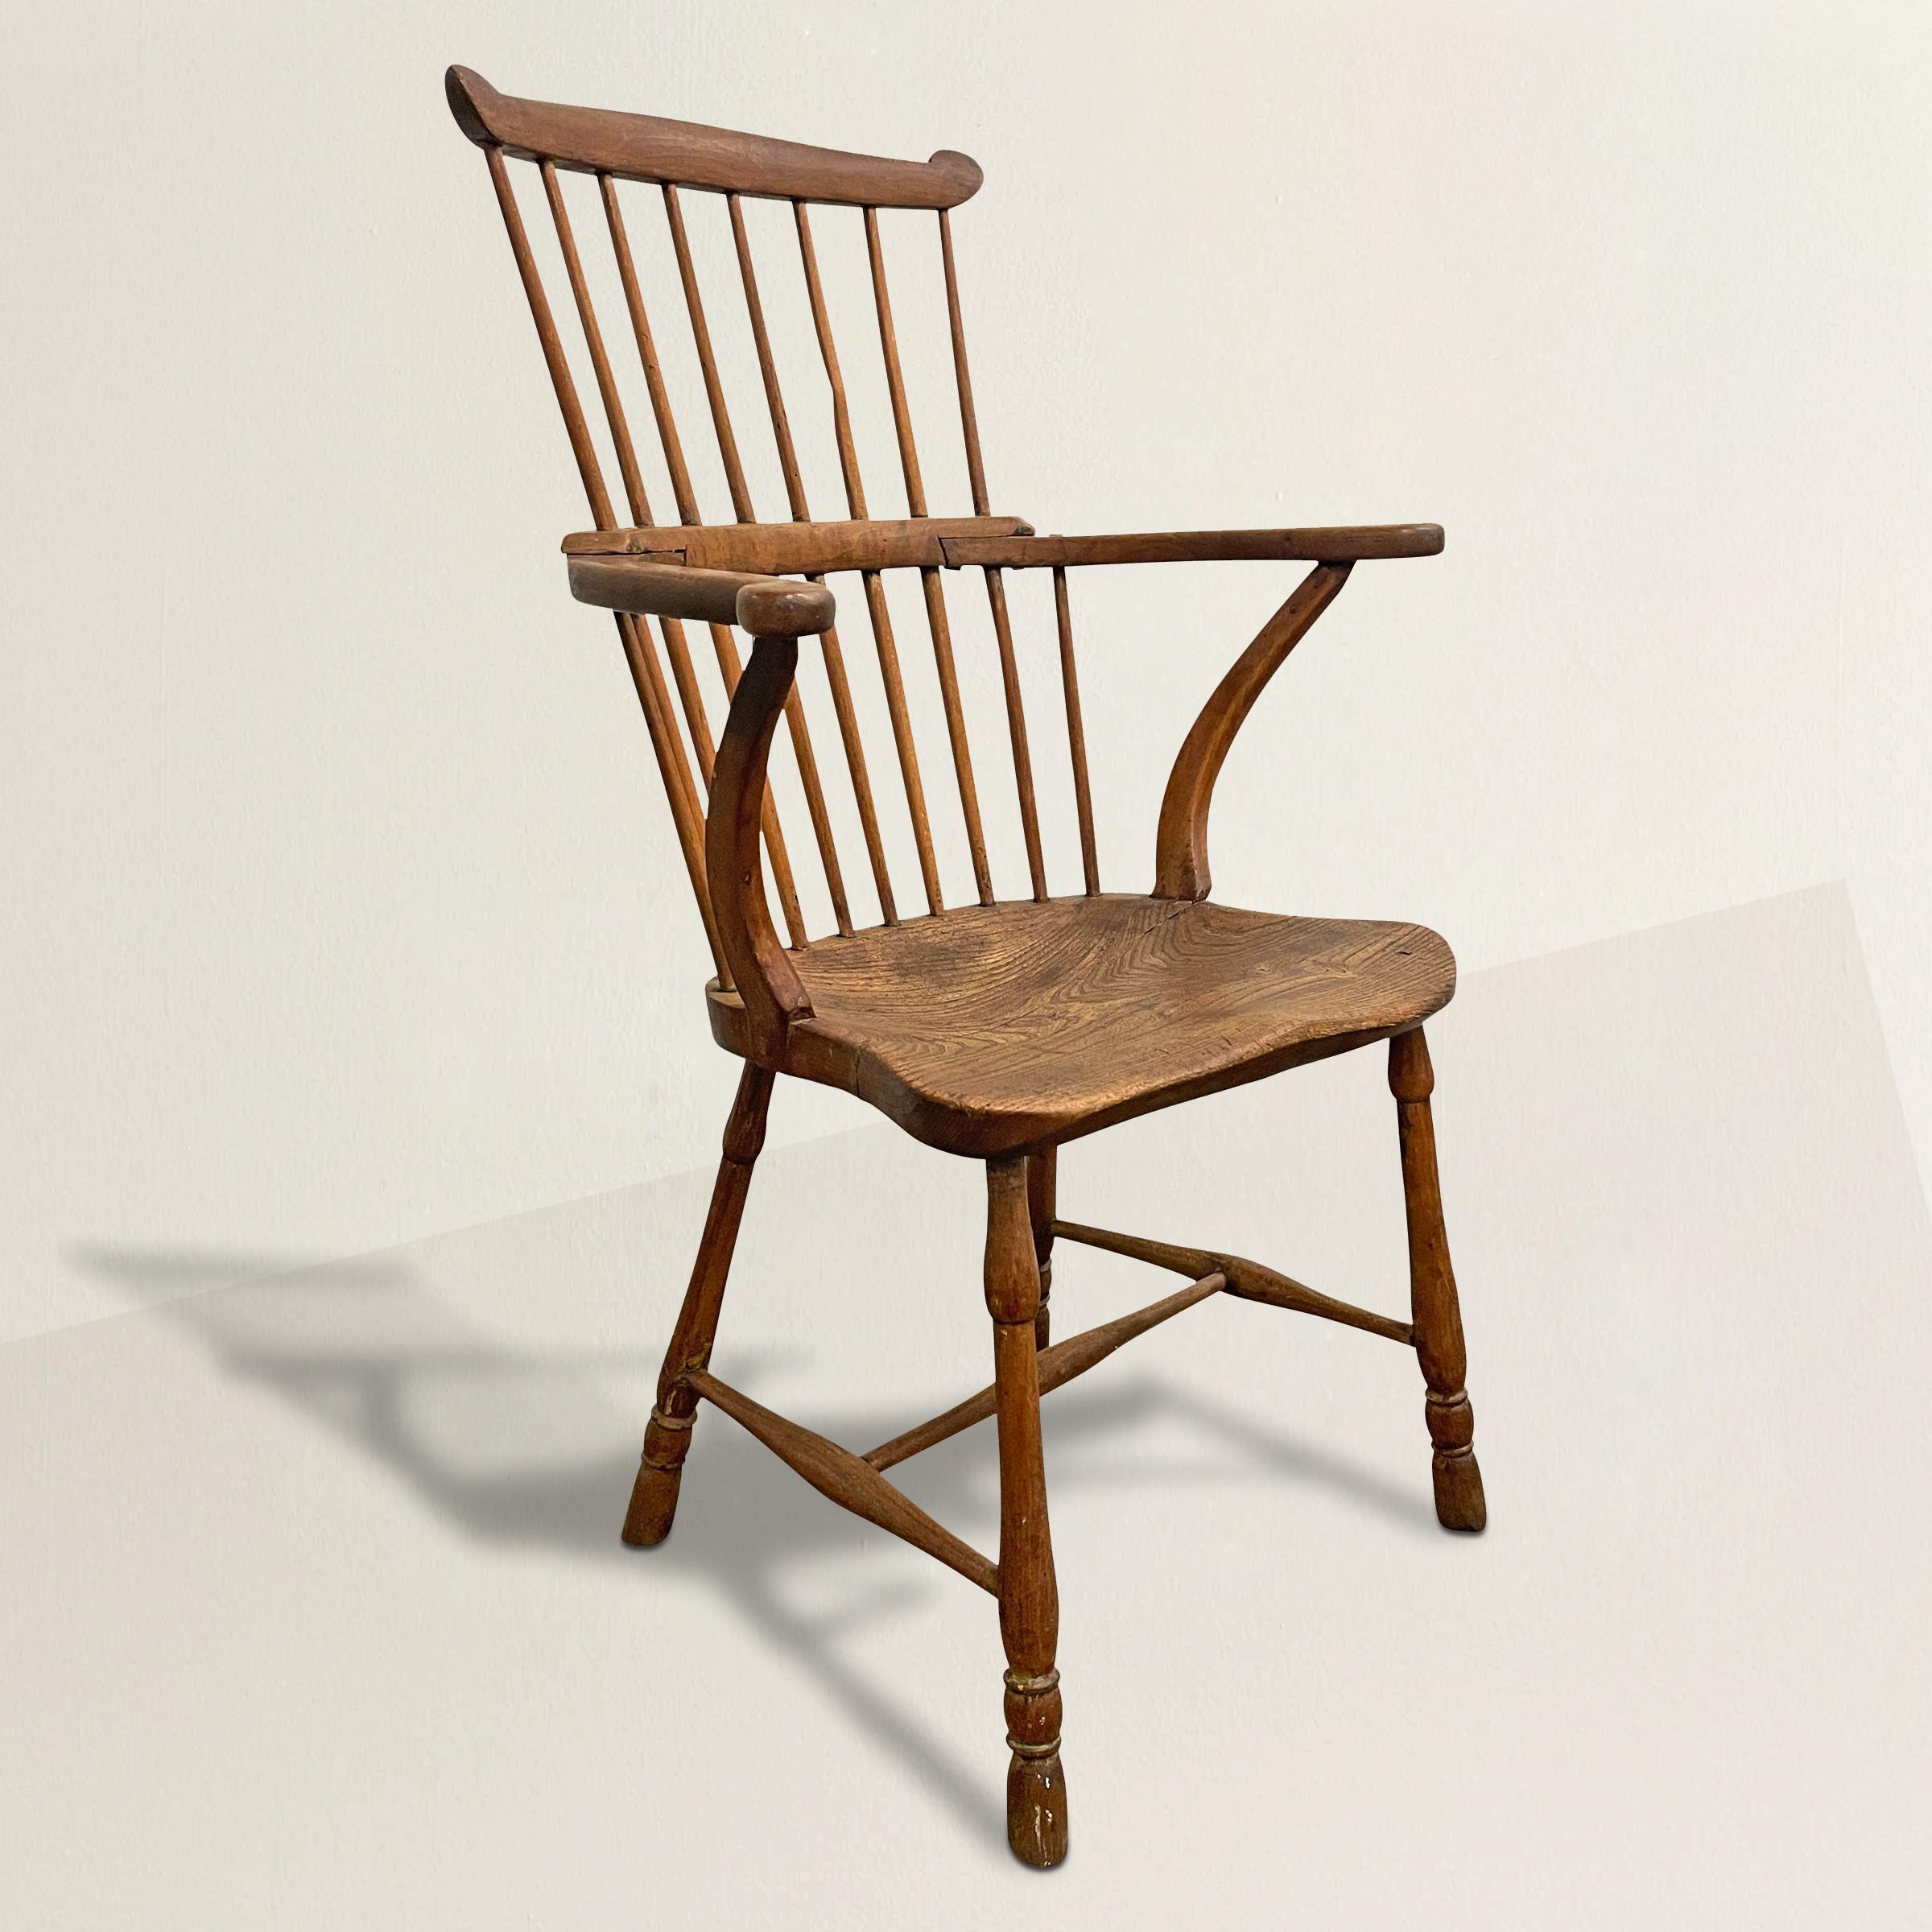 A beautiful 19th century English ash and oak comb-back Windsor chair with out-turned arms supported by inverted stretchers, turned legs connected by a bentwood stretcher, and a solid oak seat. The seat is one piece of wood with a beautiful patina,